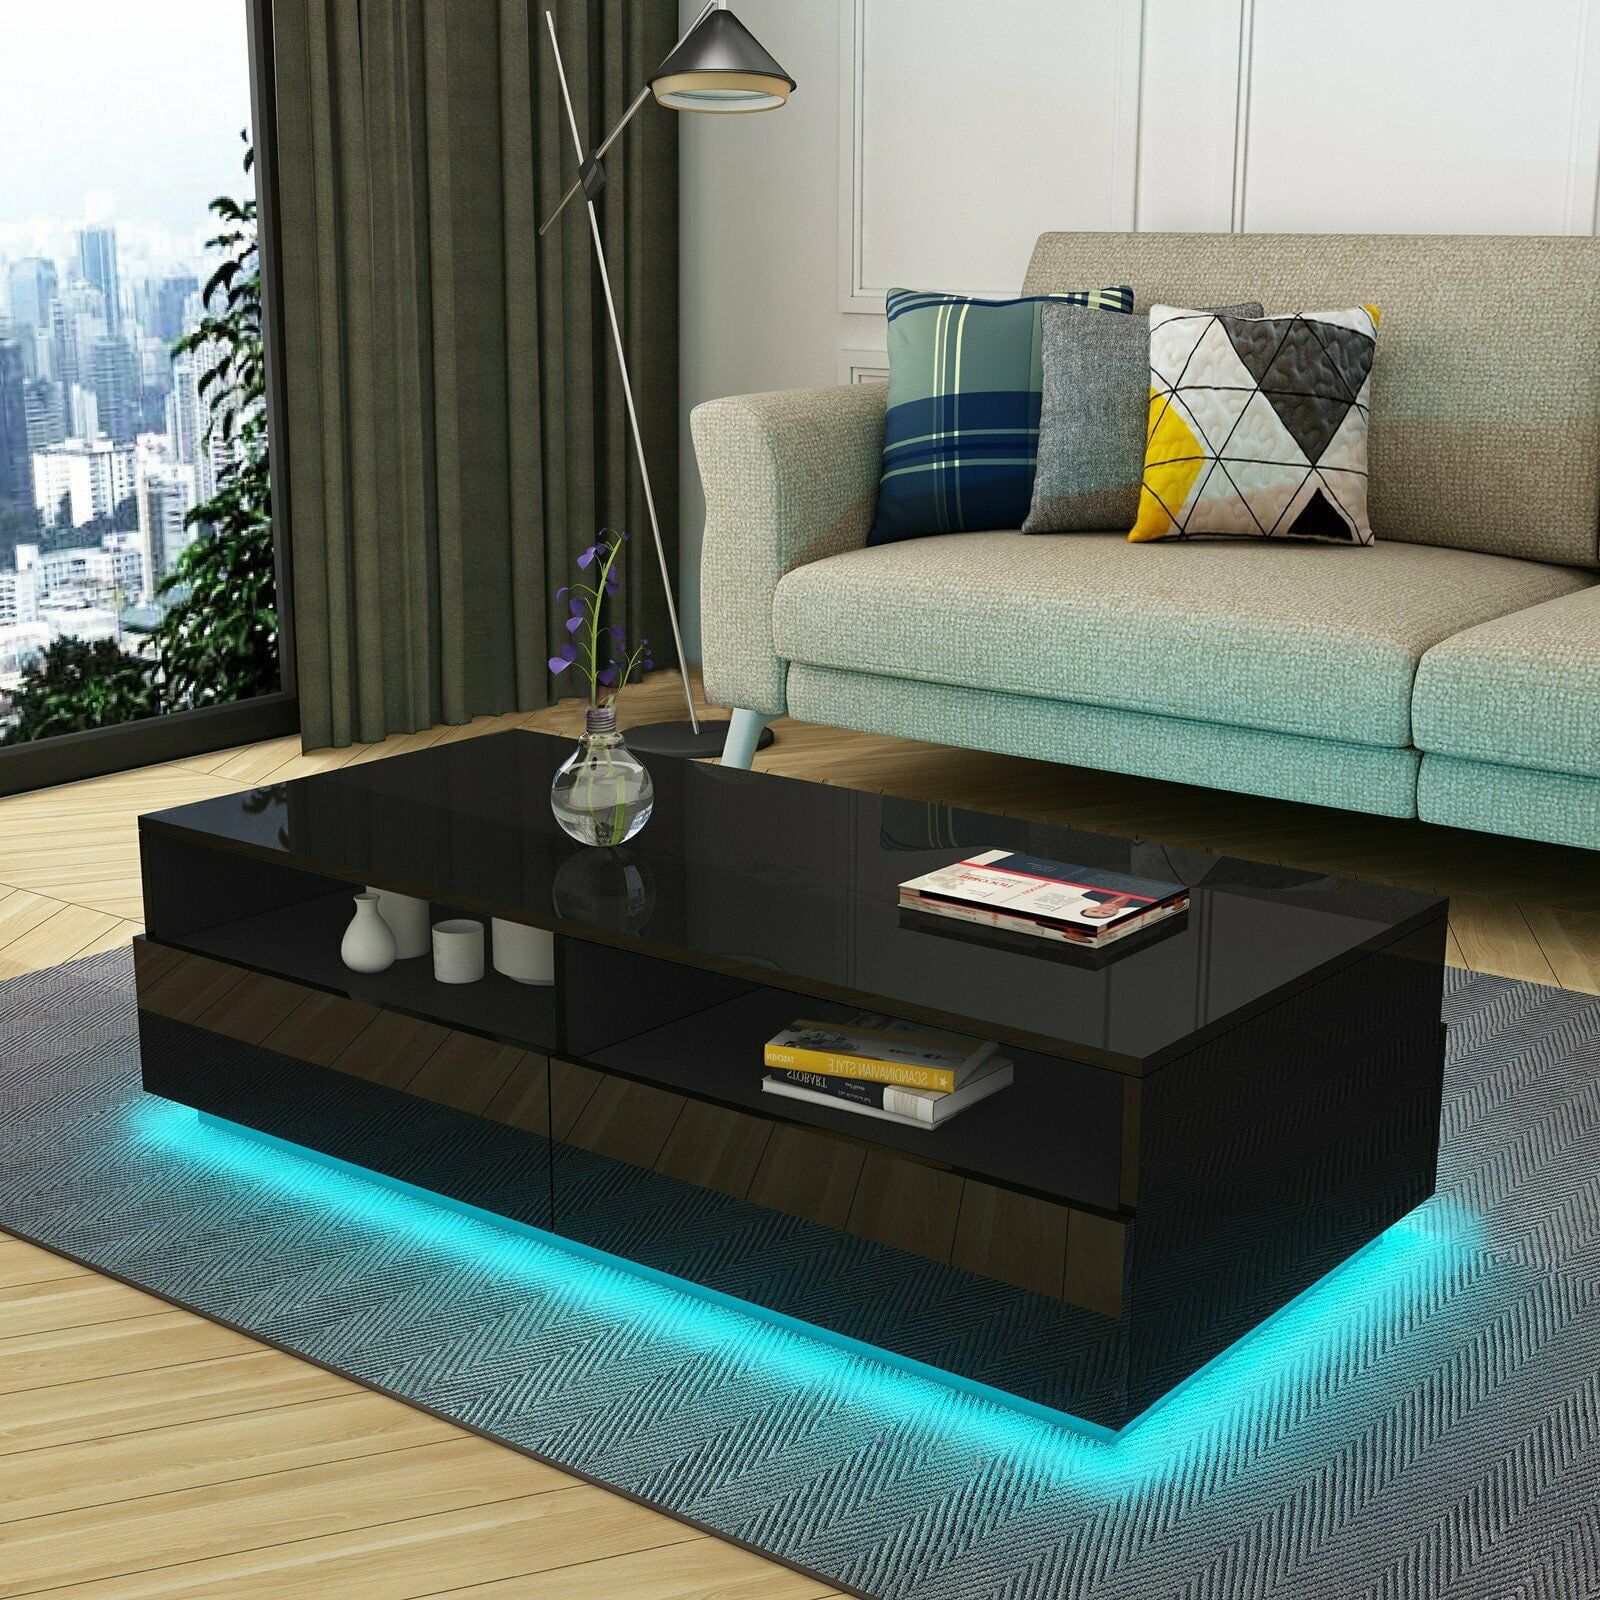 Led Rectangular Coffee Table Tea Modern Living Room Furniture Black Within Coffee Tables With Led Lights (View 15 of 15)